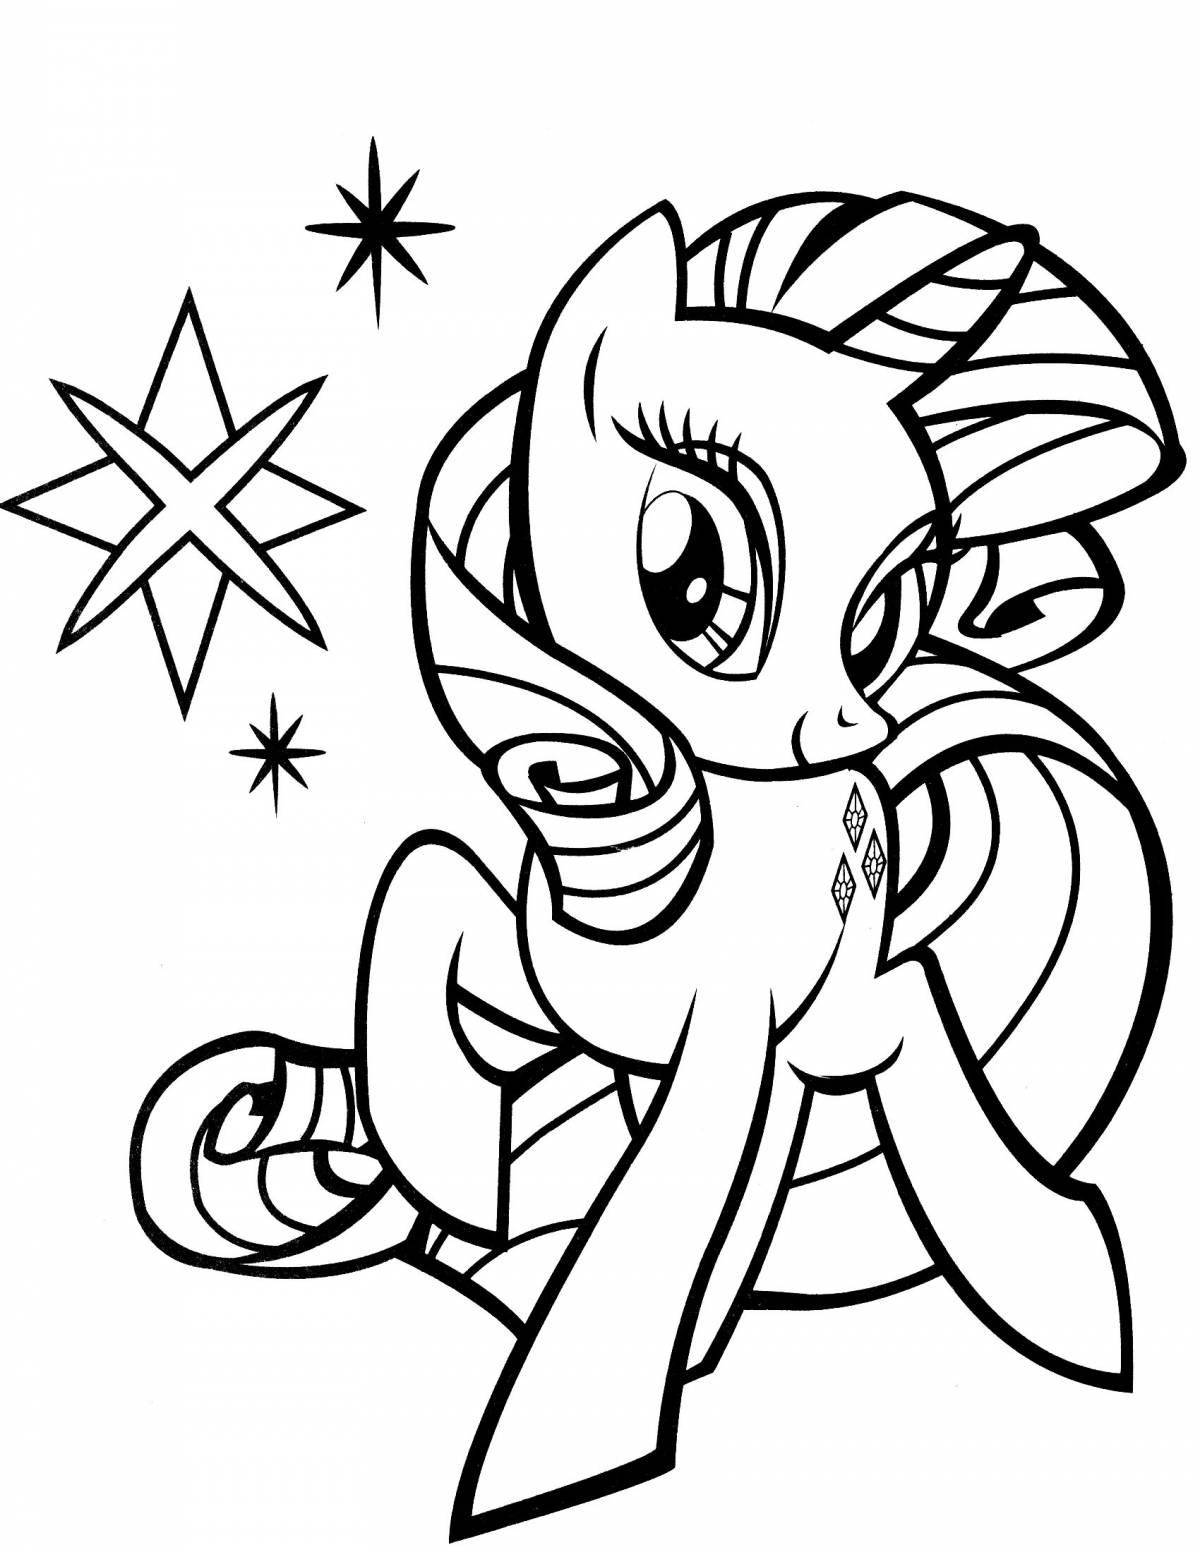 Playful little pony coloring book for kids